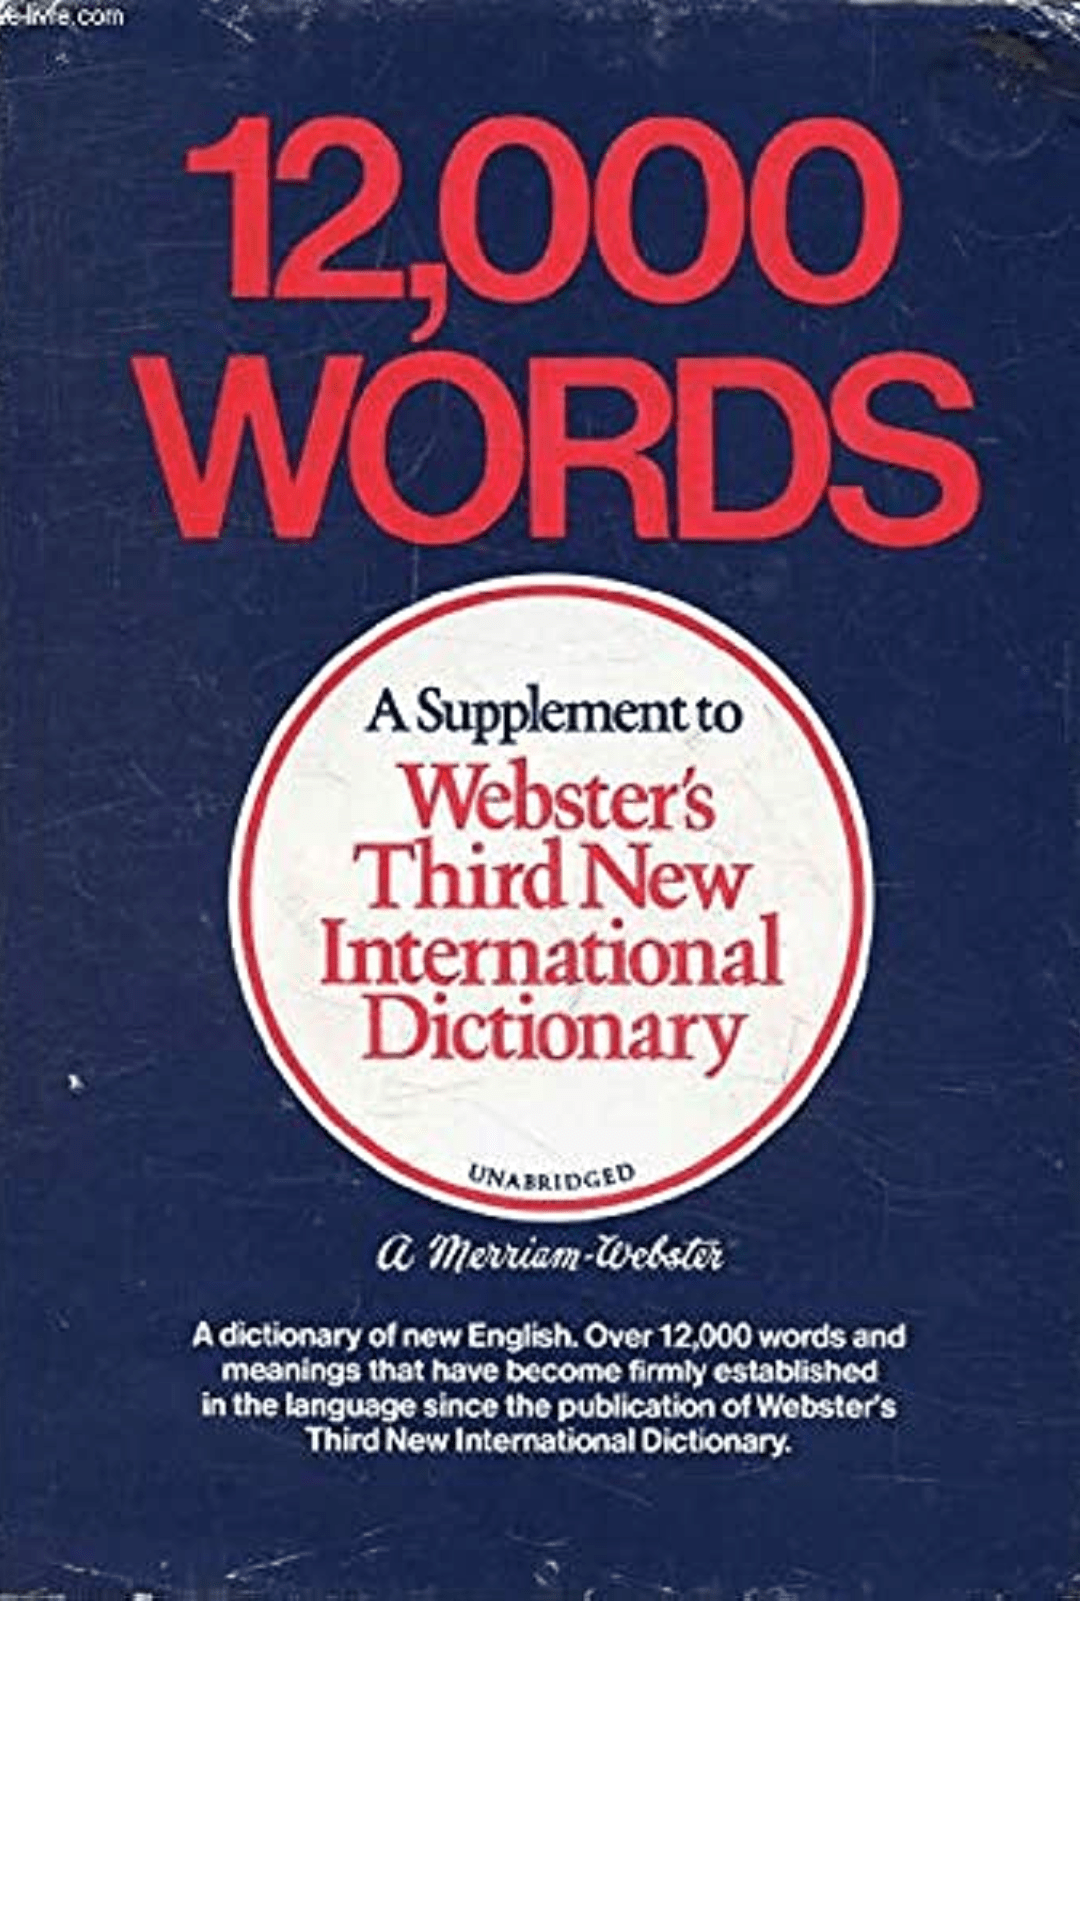 12,000 Words: A Supplement to Webster's Third new International Dictionary